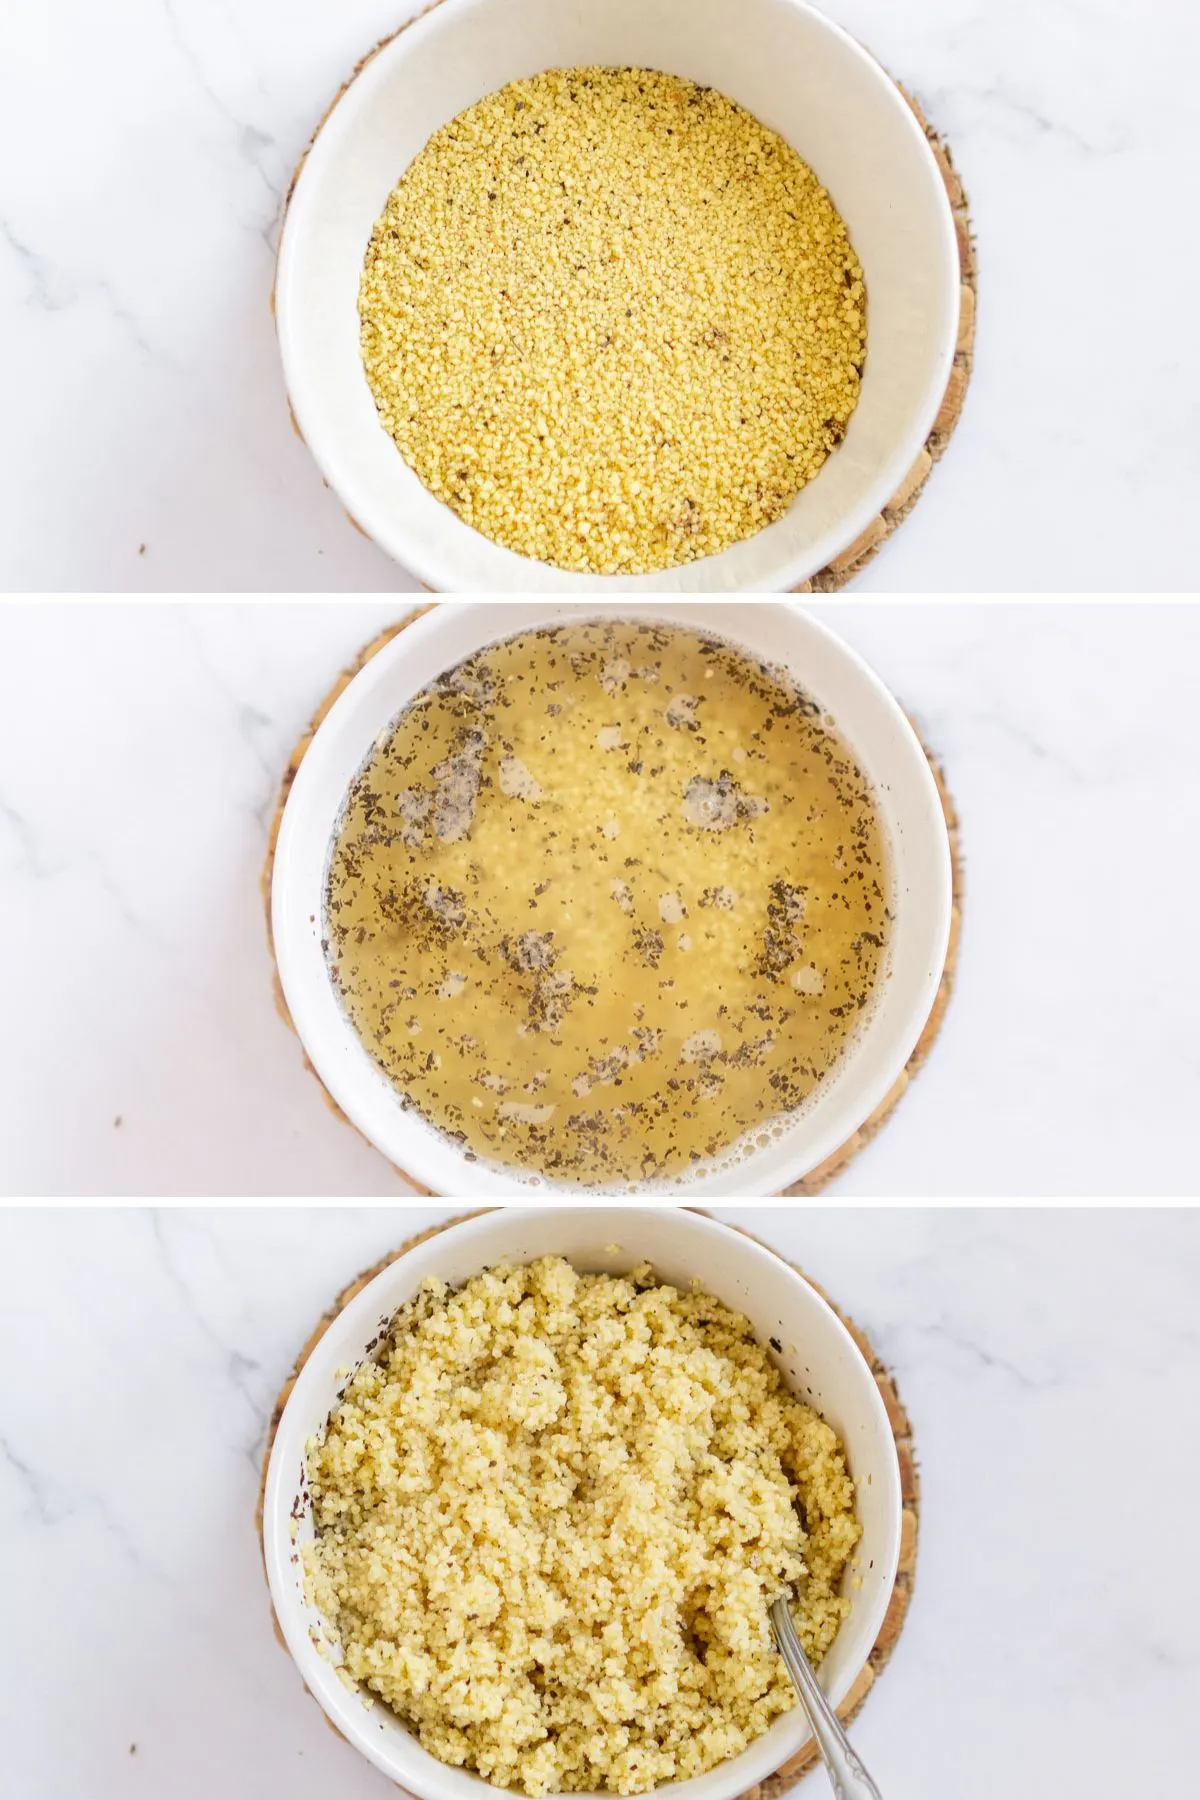 3 photos showing how to make couscous with boiling water